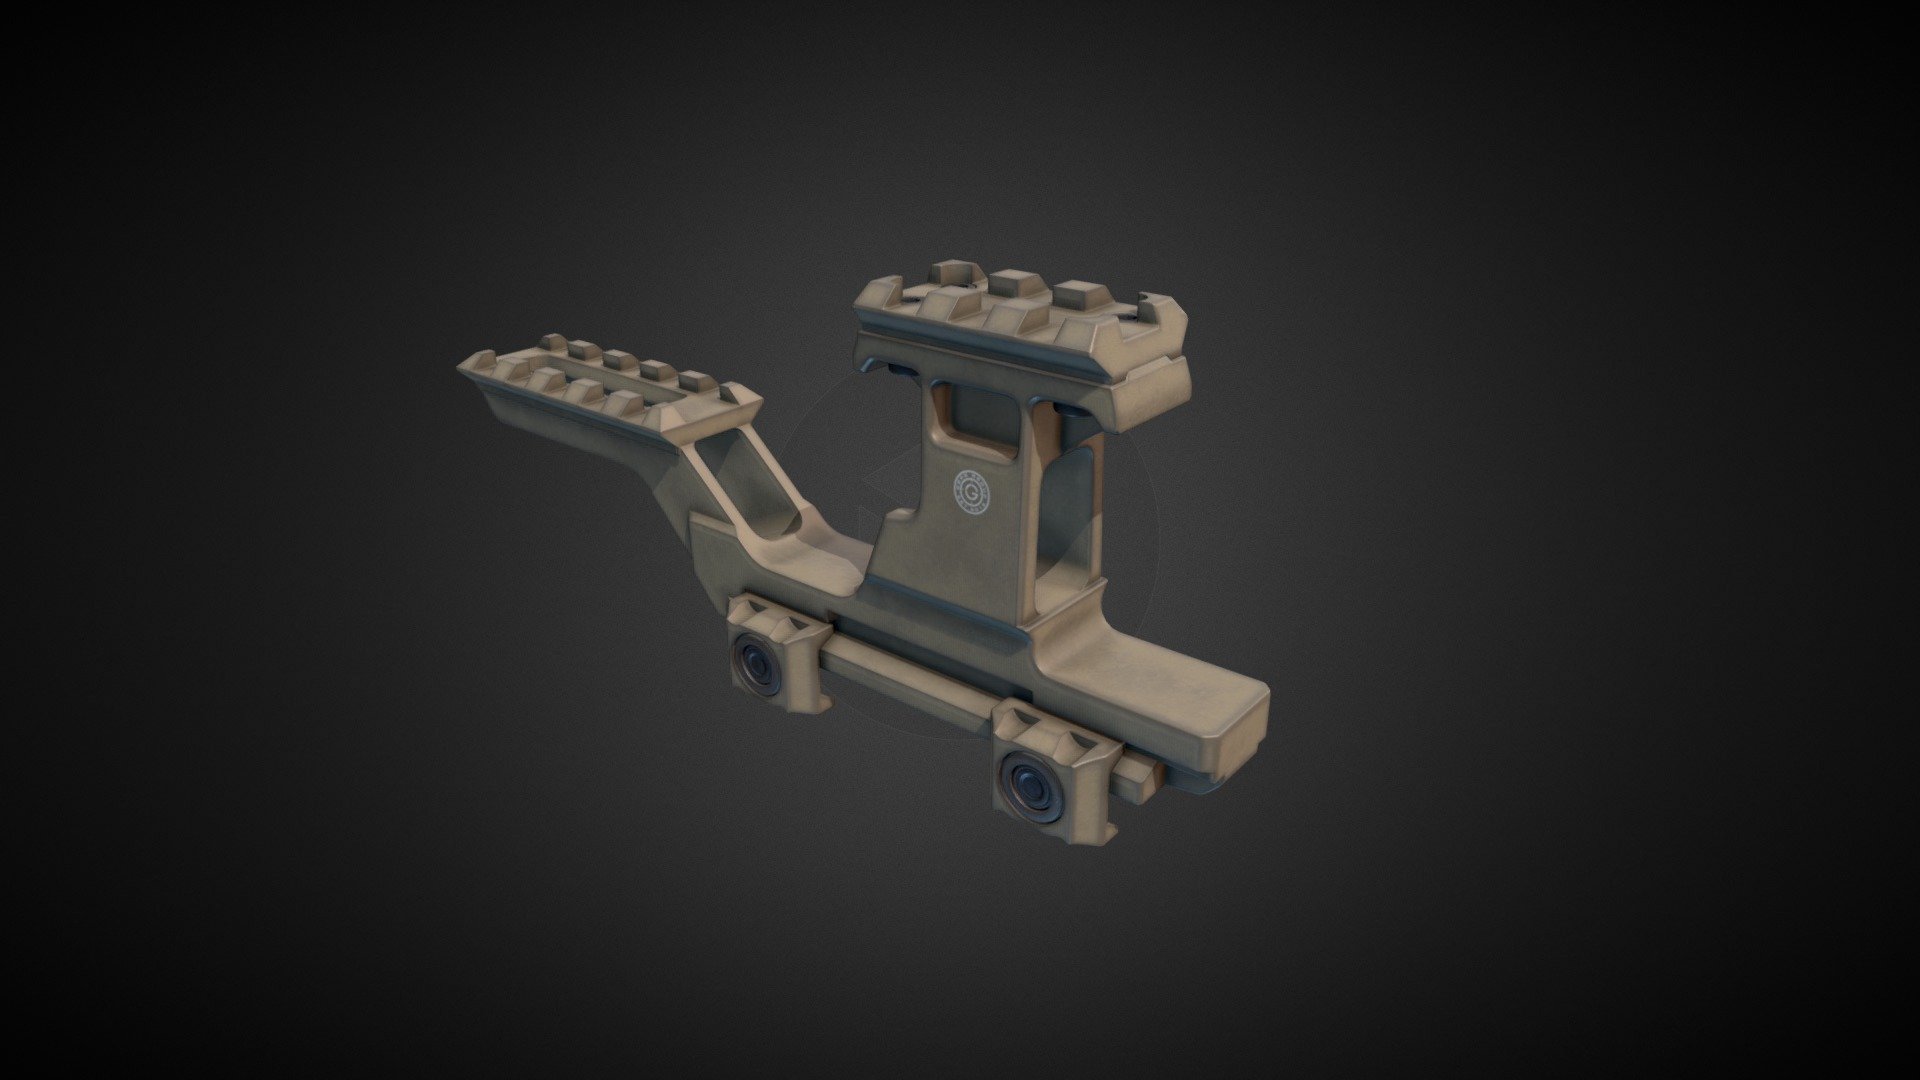 Prototype of optic mount with two stage picatinyrail.  

Model have one PBR material in 4K(black and FDE color available)

Verts: 3K

Tris: 6k  

Made in Blender.  

PS.Model is NOT MADE TO BE 3D PRINTABLE. Please do not ask for conversion for printing 3d model